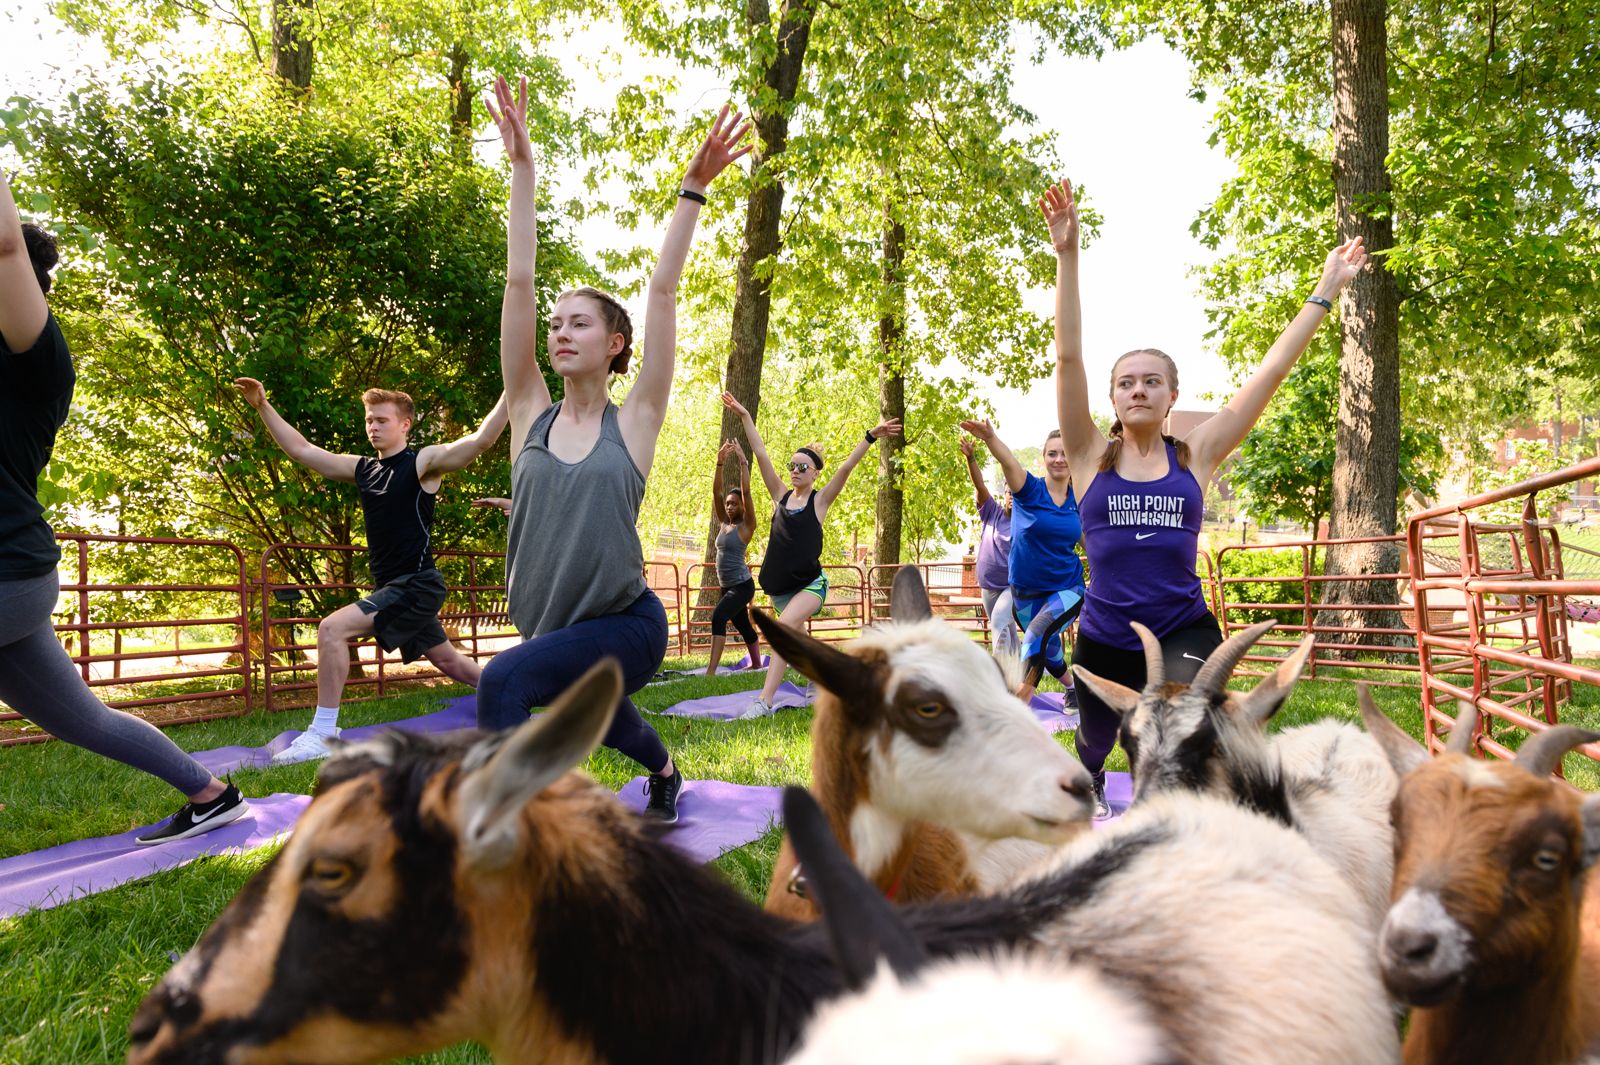 Students doing yoga with goats